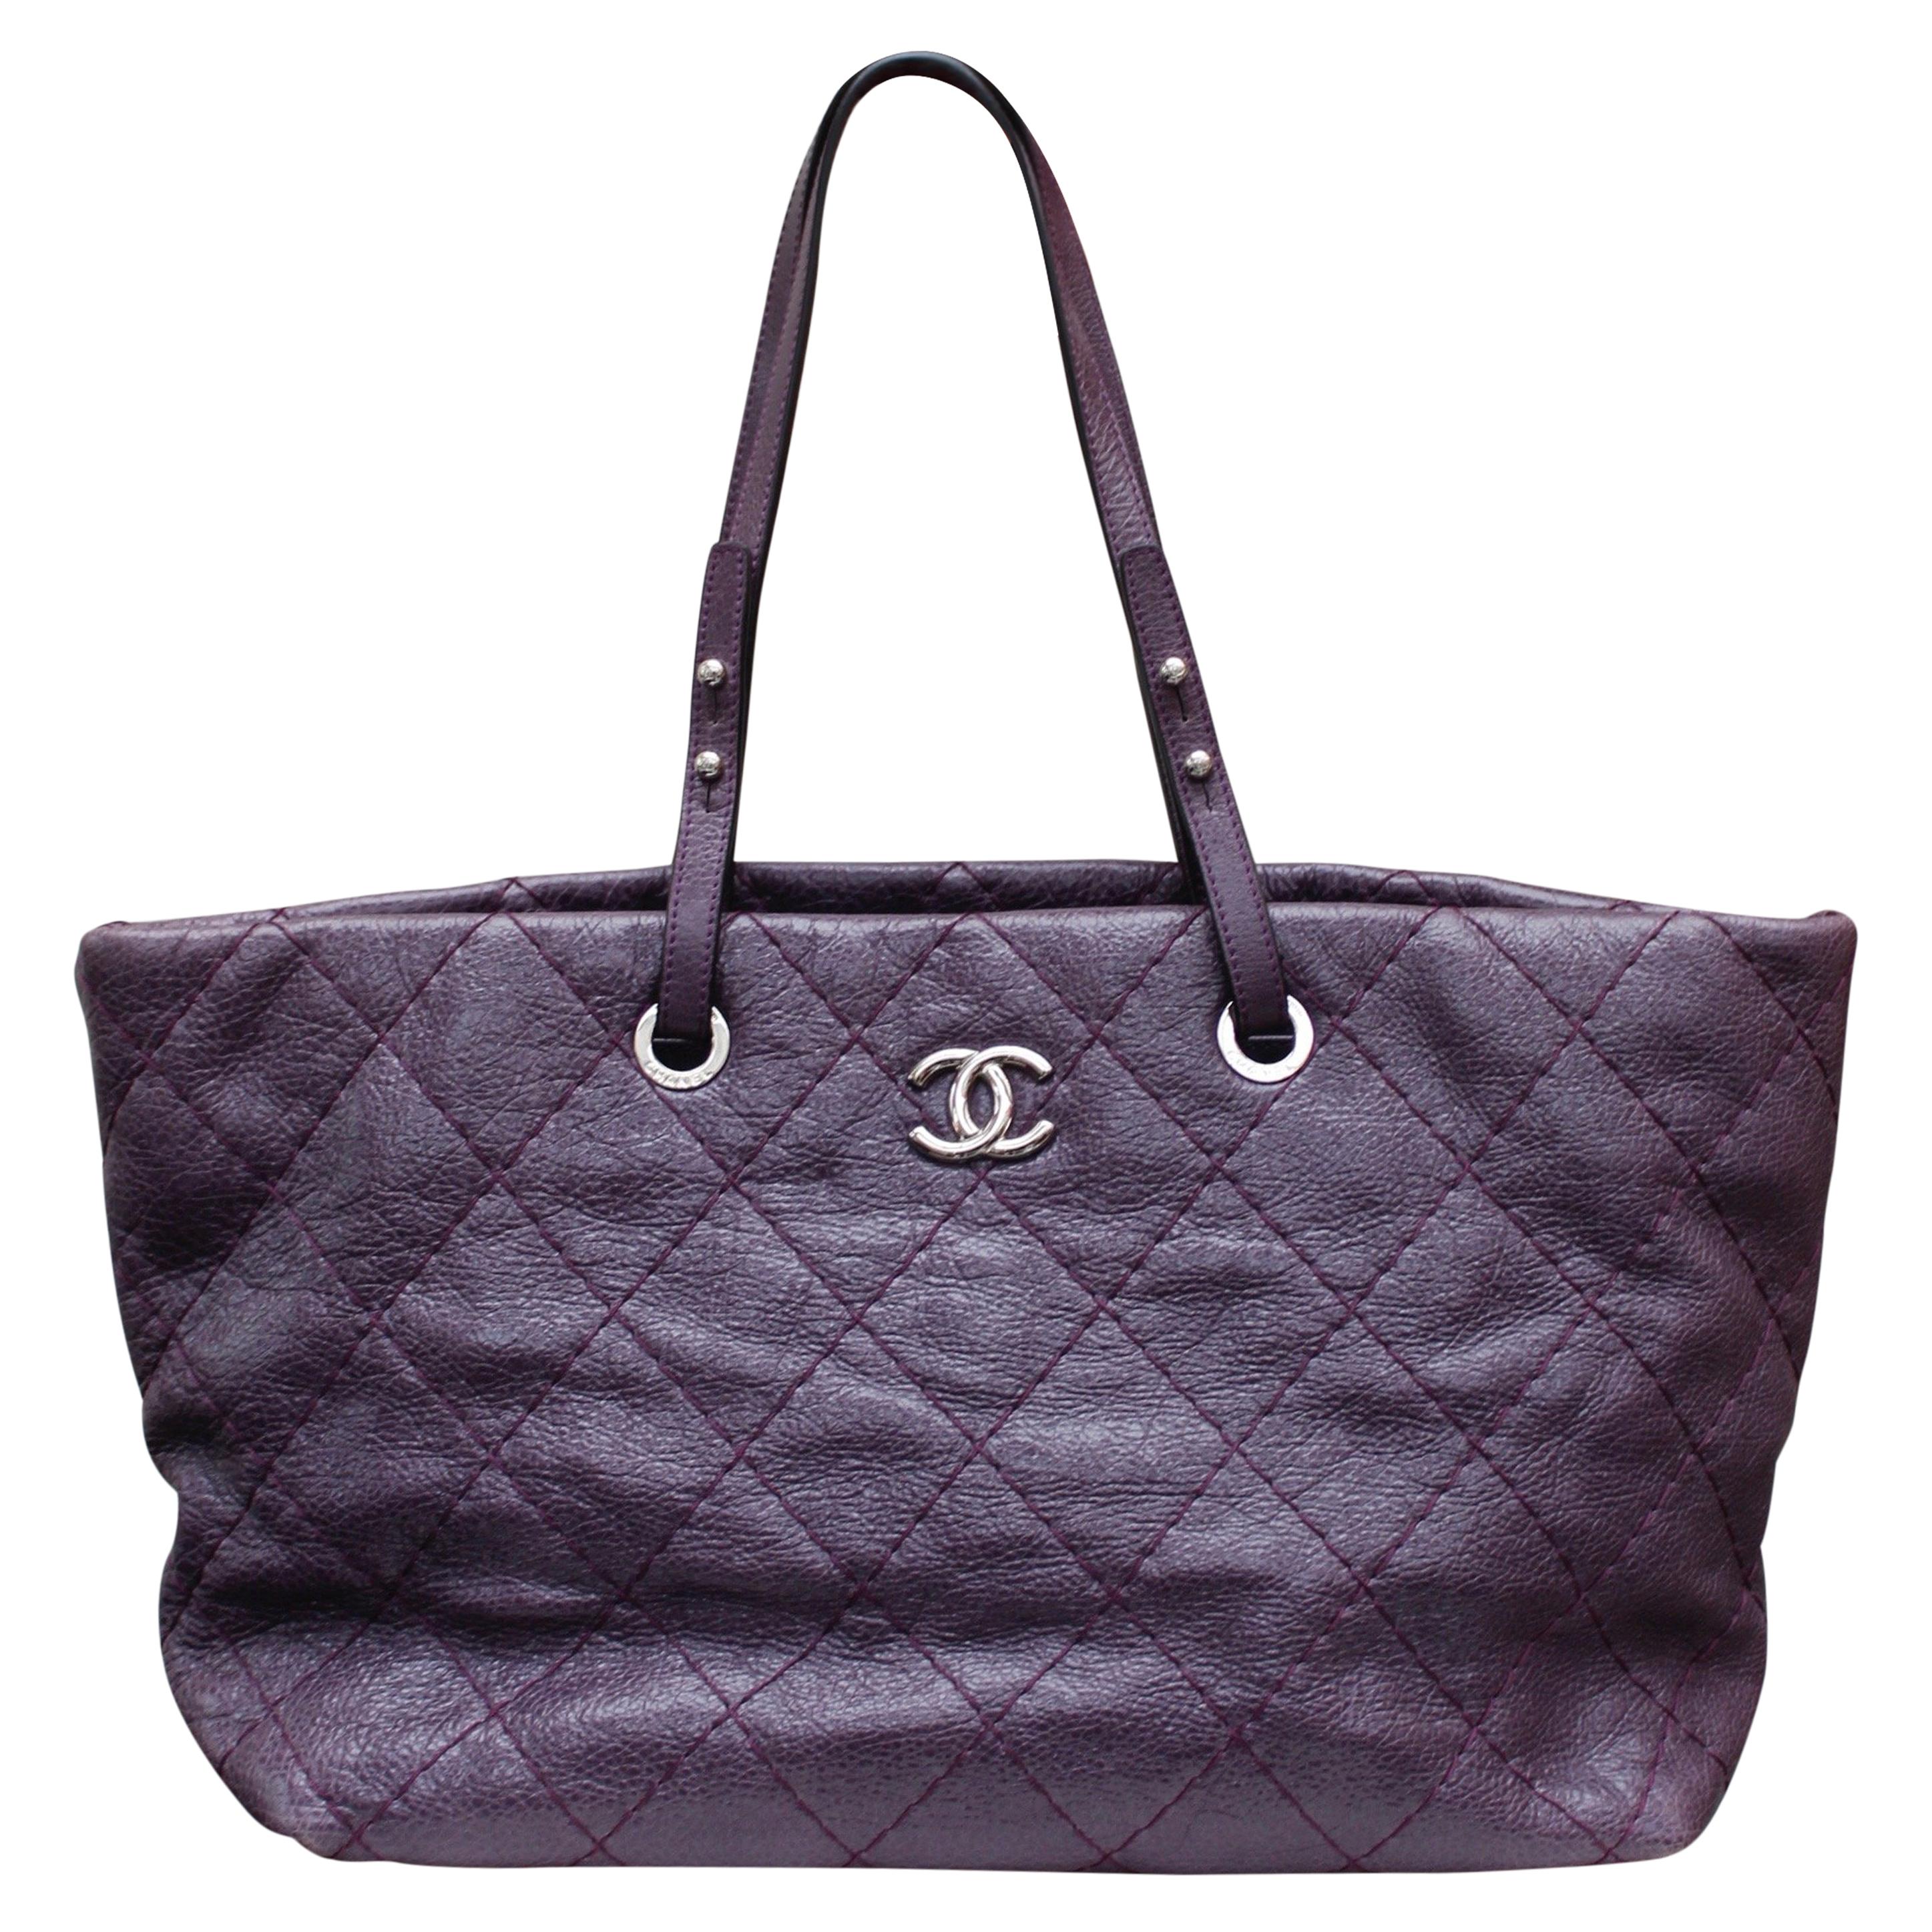 Chanel tote bag in over stitched eggplant leather